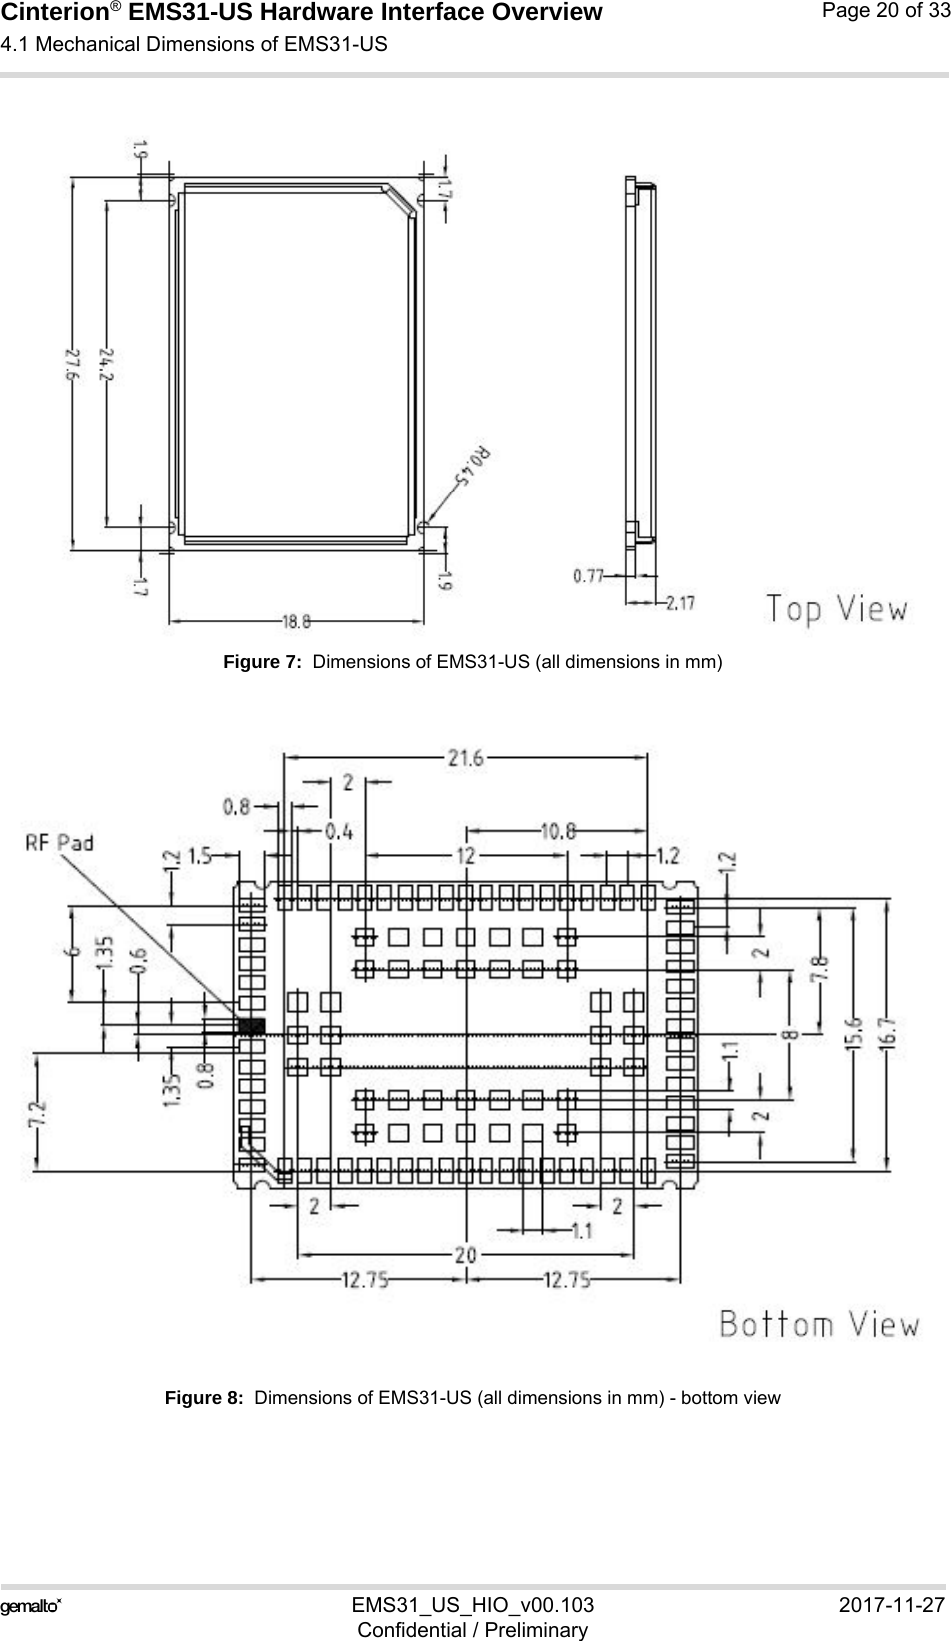 Cinterion® EMS31-US Hardware Interface Overview4.1 Mechanical Dimensions of EMS31-US20EMS31_US_HIO_v00.103 2017-11-27Confidential / PreliminaryPage 20 of 33Figure 7:  Dimensions of EMS31-US (all dimensions in mm)Figure 8:  Dimensions of EMS31-US (all dimensions in mm) - bottom view